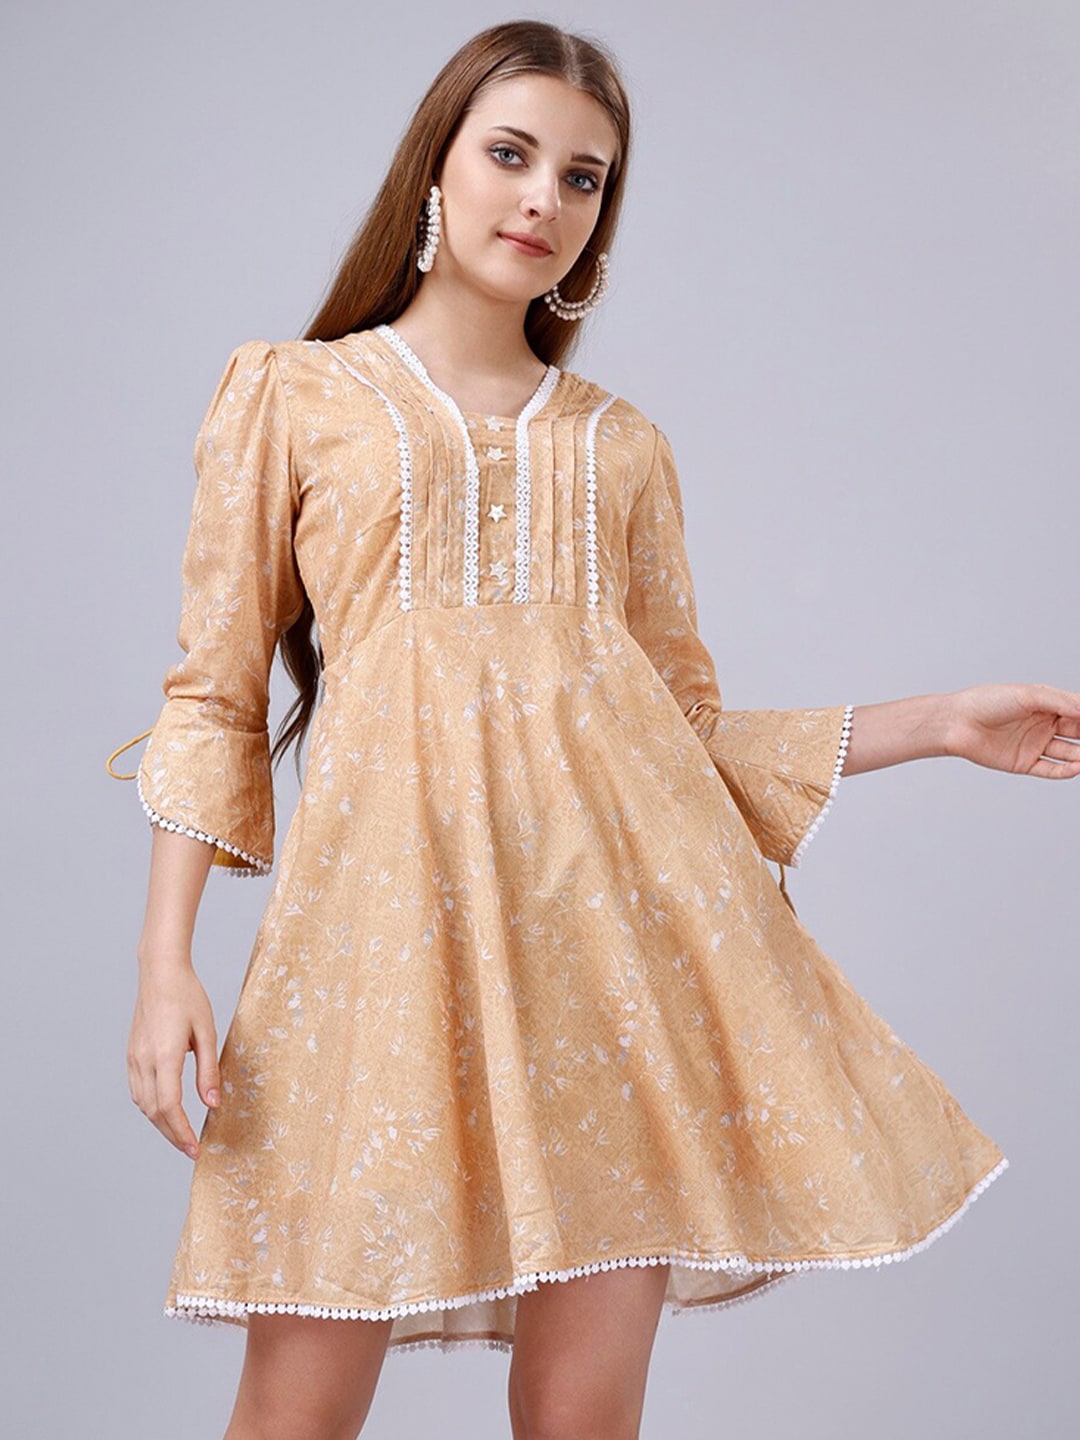 GoStyle Floral Printed Puffed Sleeves Cotton Fit and Flare Dress Price in India